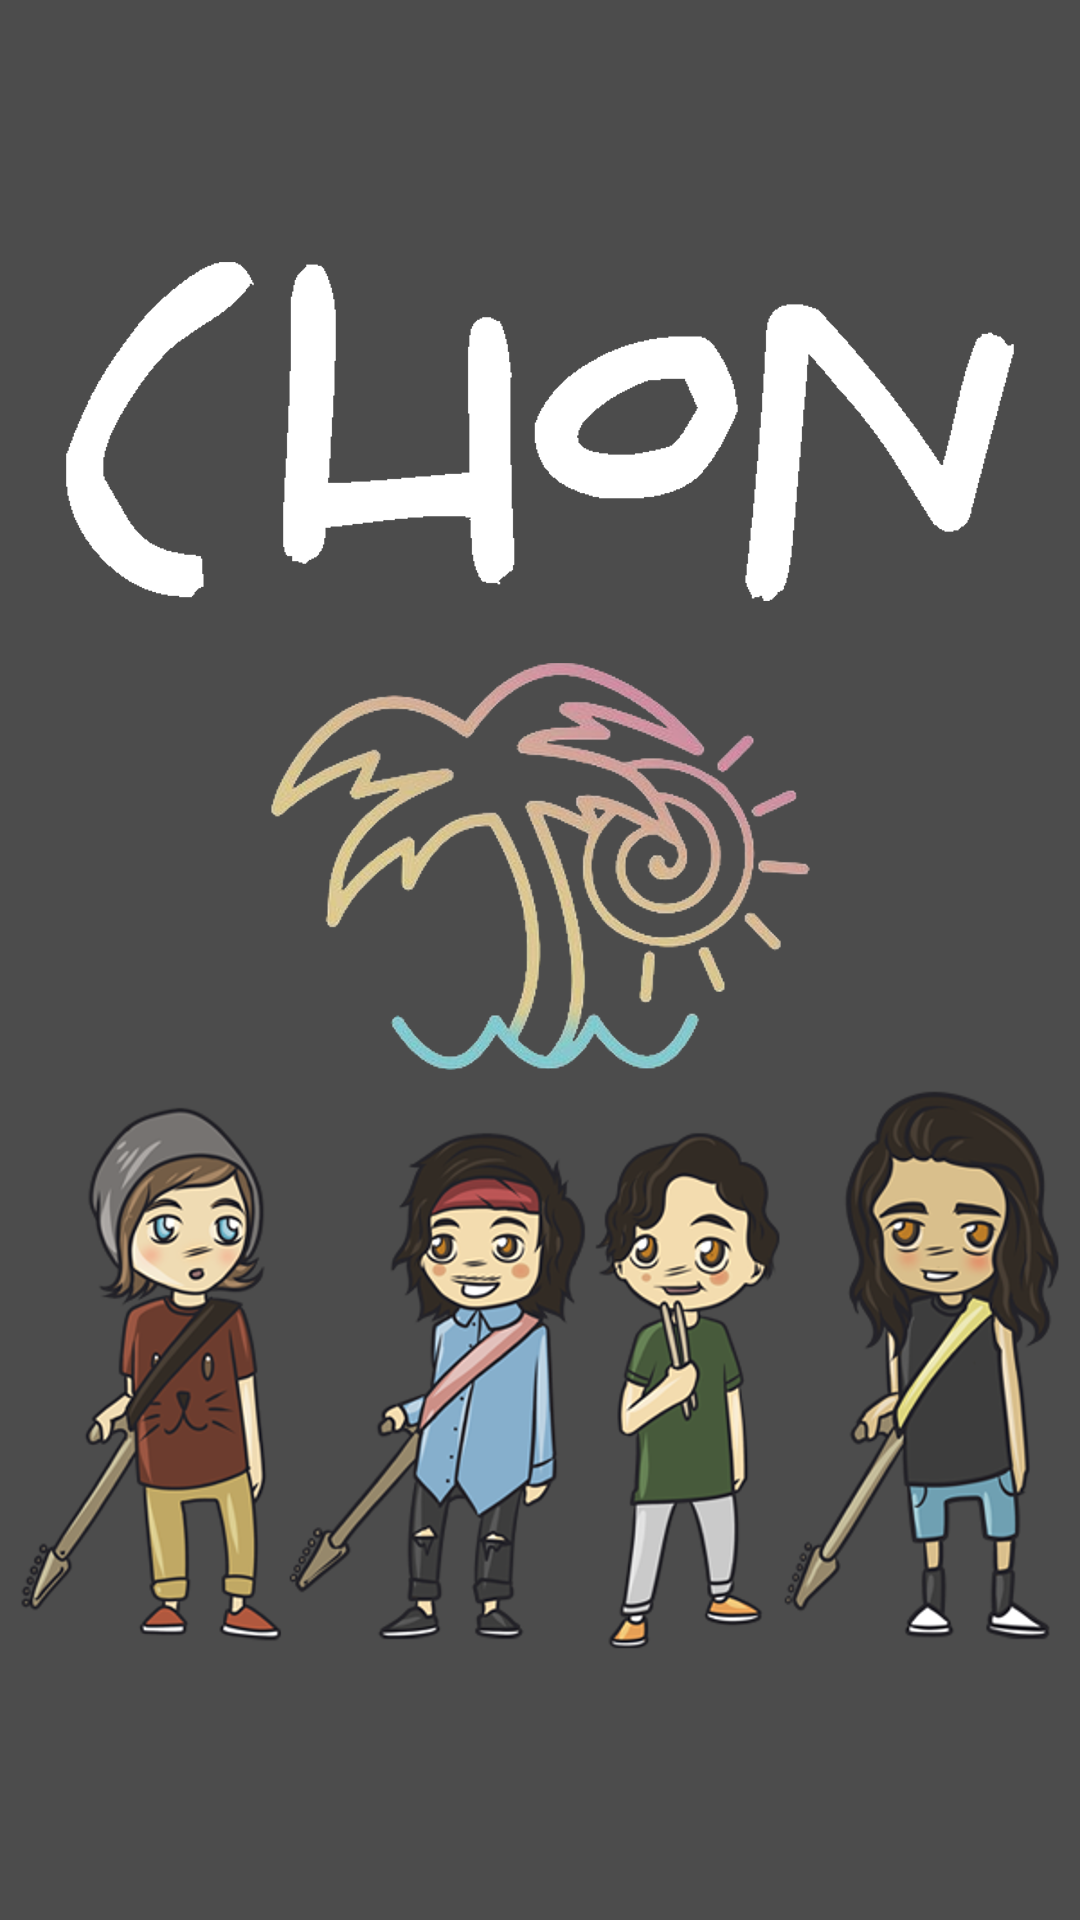 Yesterday I posted tricot and TTNG phone background, today, Chon